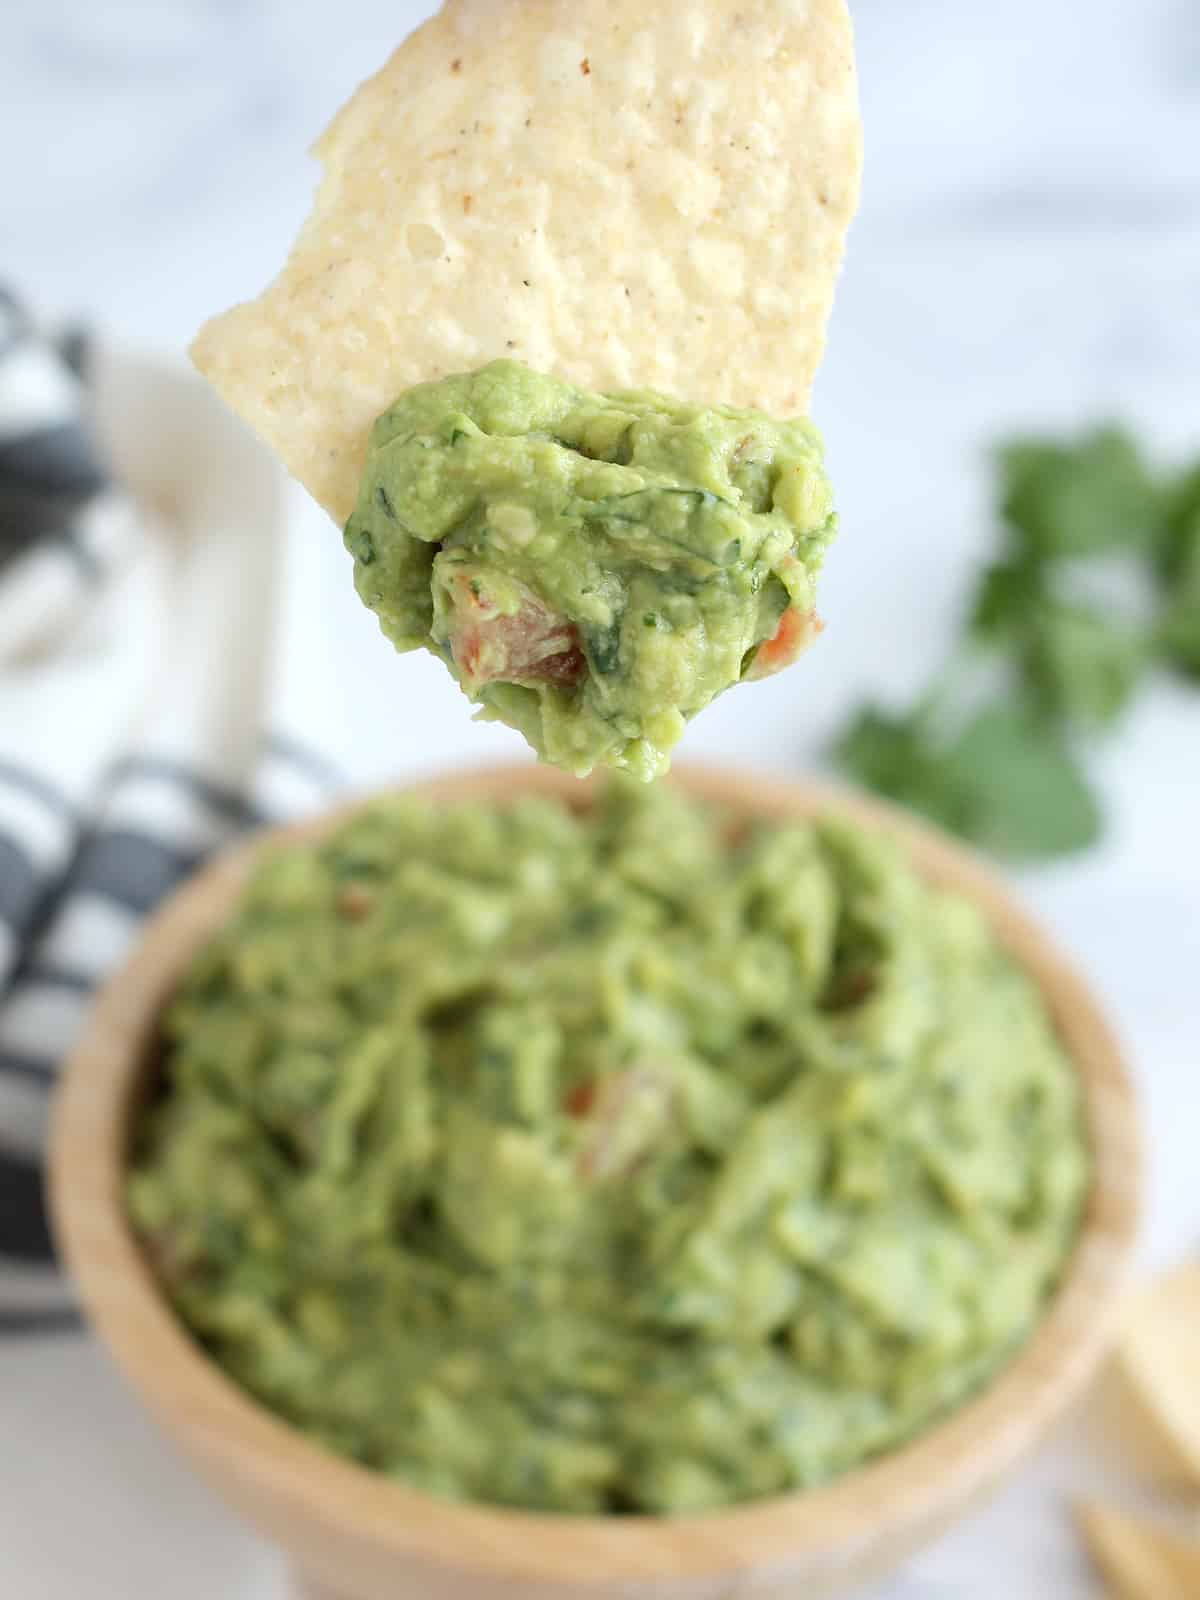 Scoop of guacamole on tortilla chips